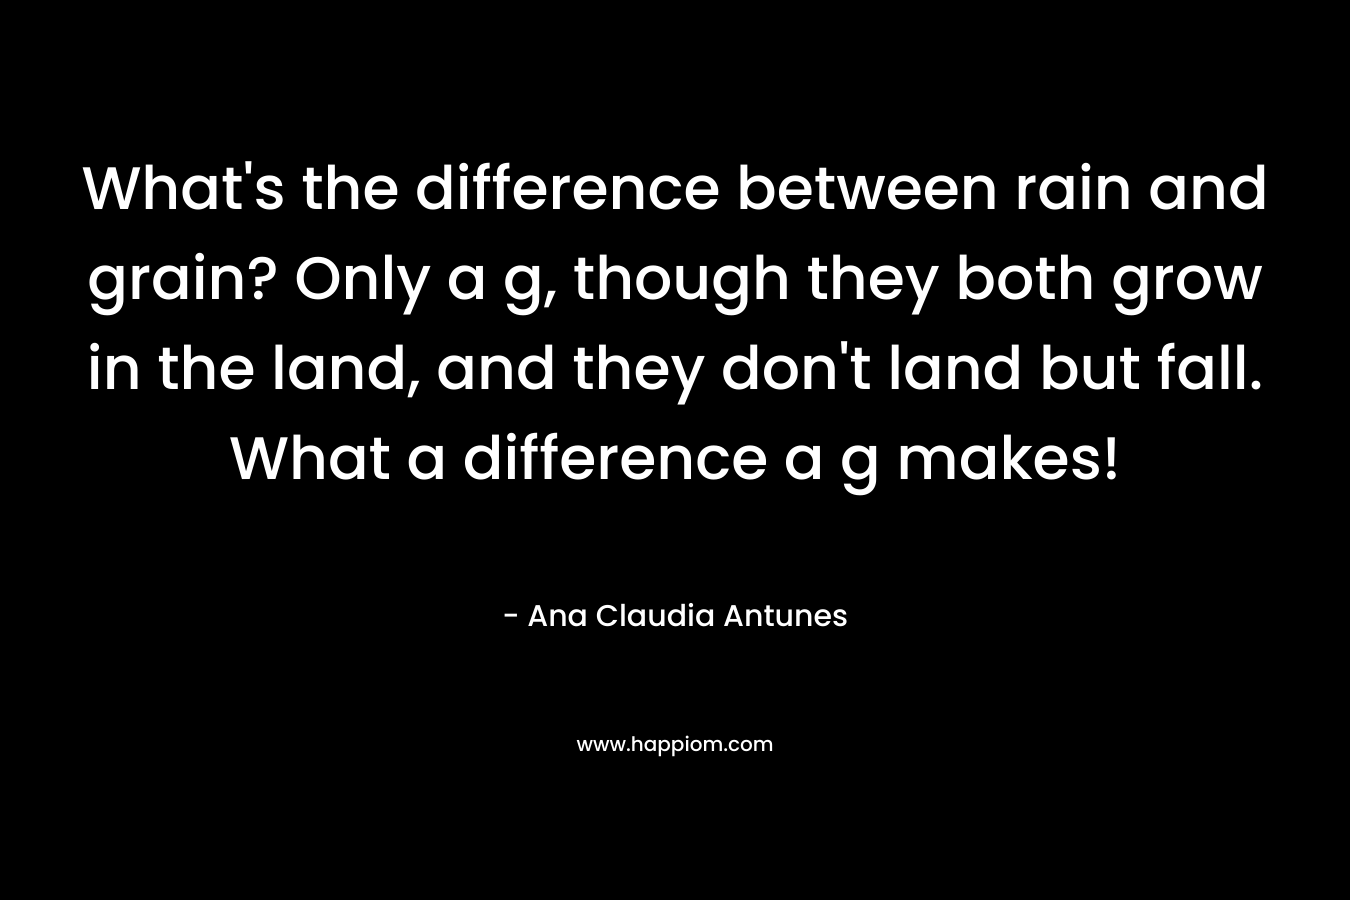 What's the difference between rain and grain? Only a g, though they both grow in the land, and they don't land but fall. What a difference a g makes!